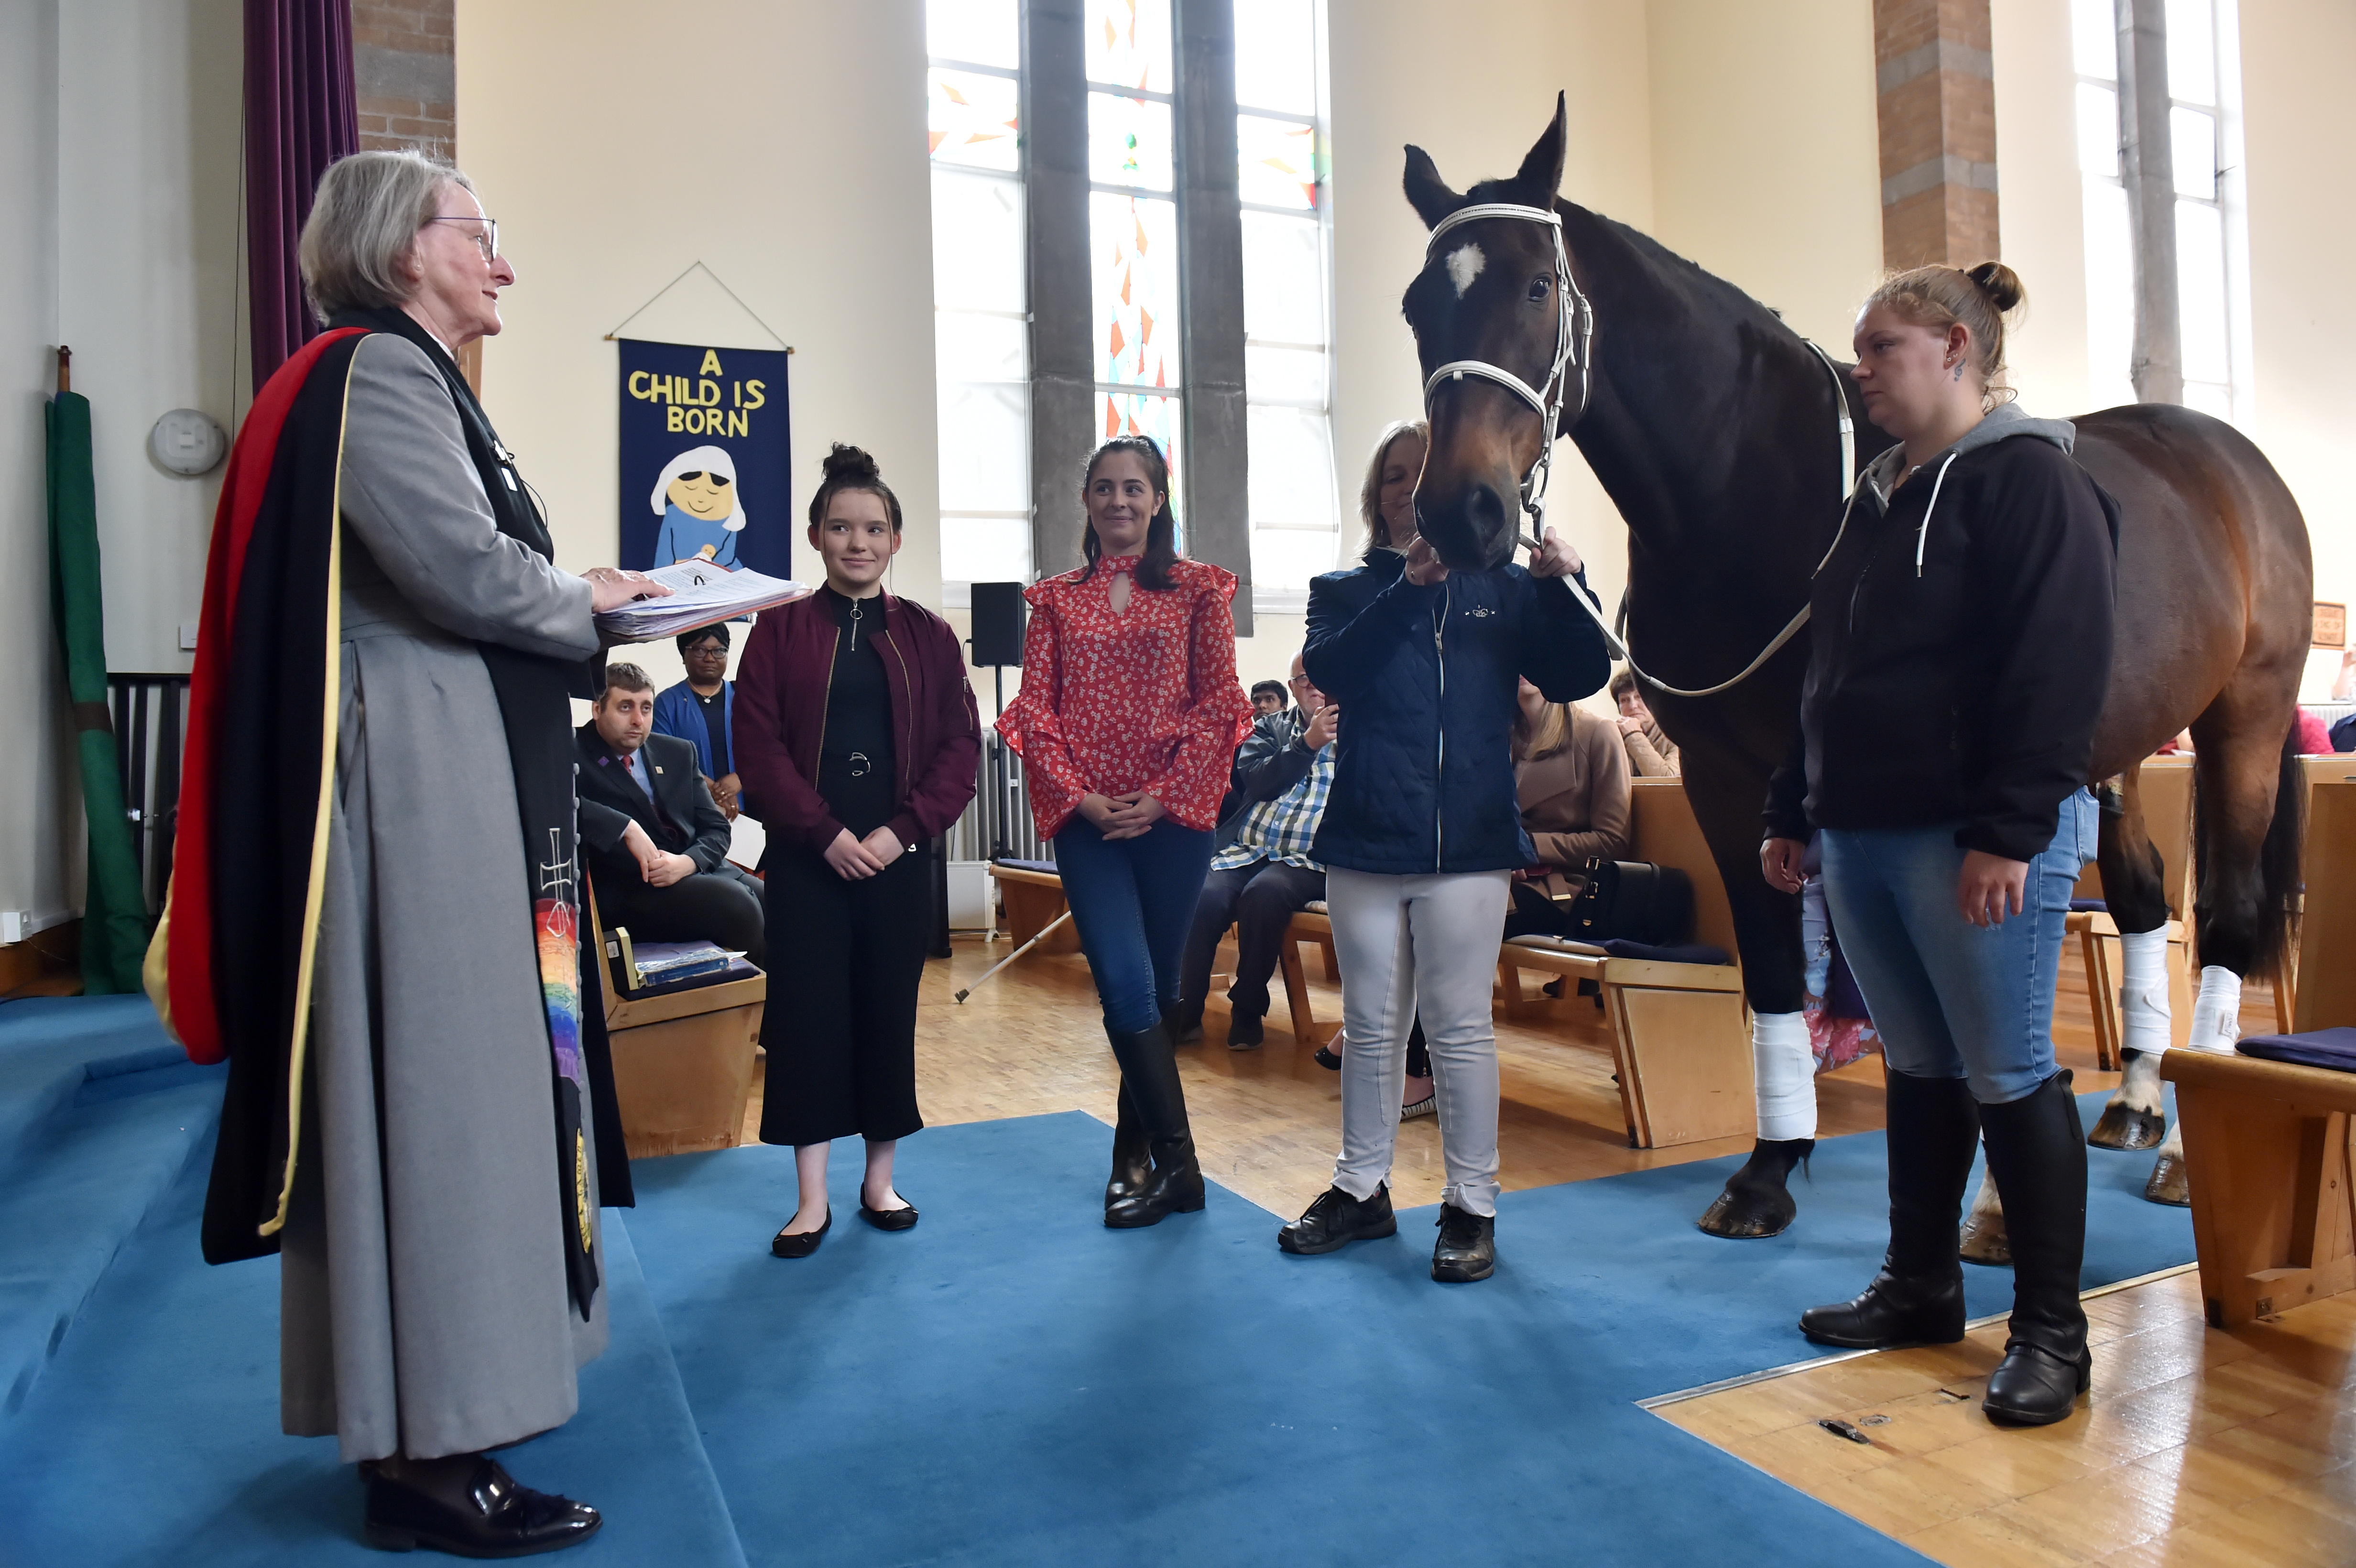 Rev Flora Munro and Ollie the horse during the service.